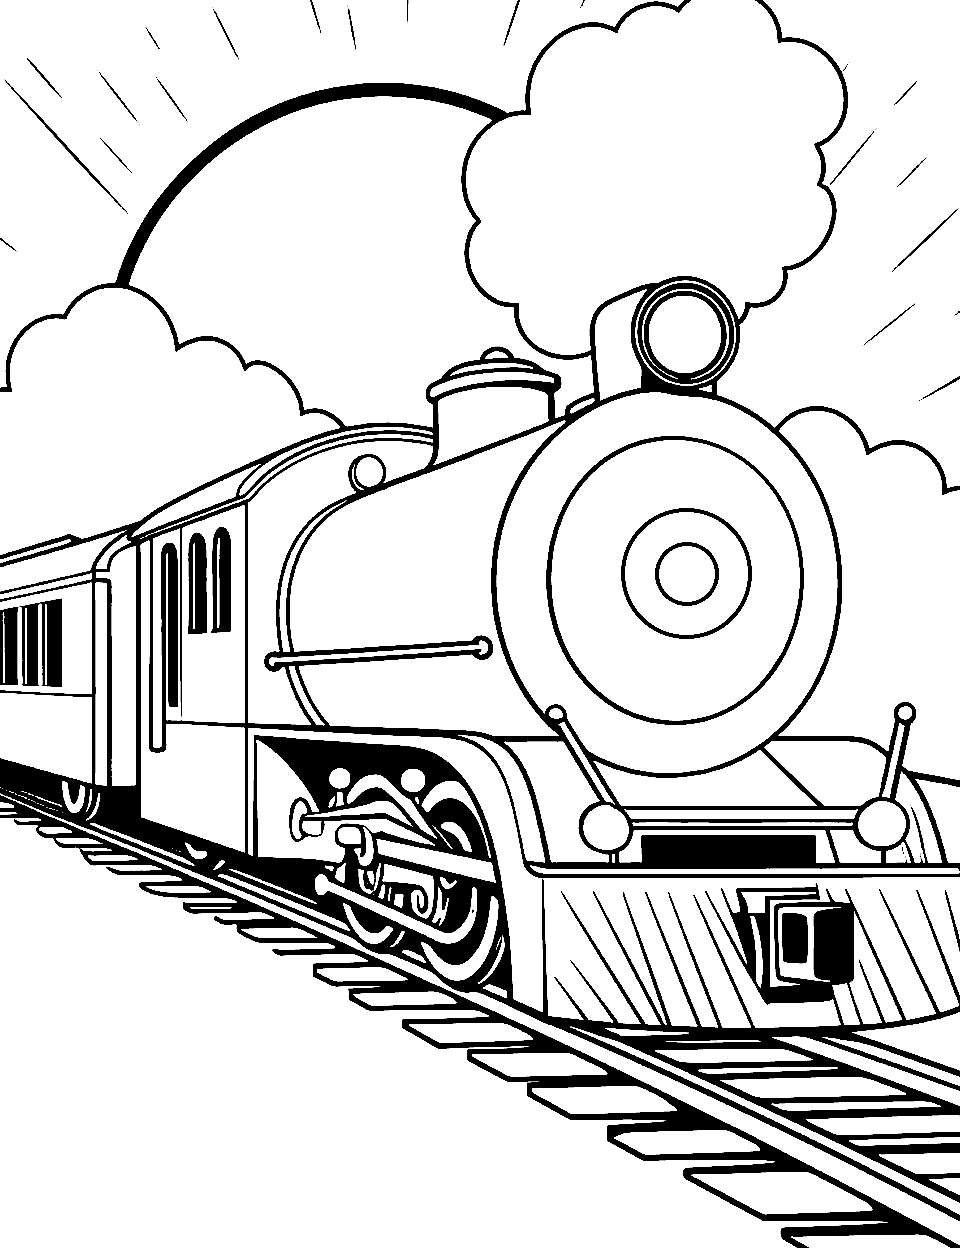 Sunset Express Train Coloring Page - A train journeying during a stunning sunset.